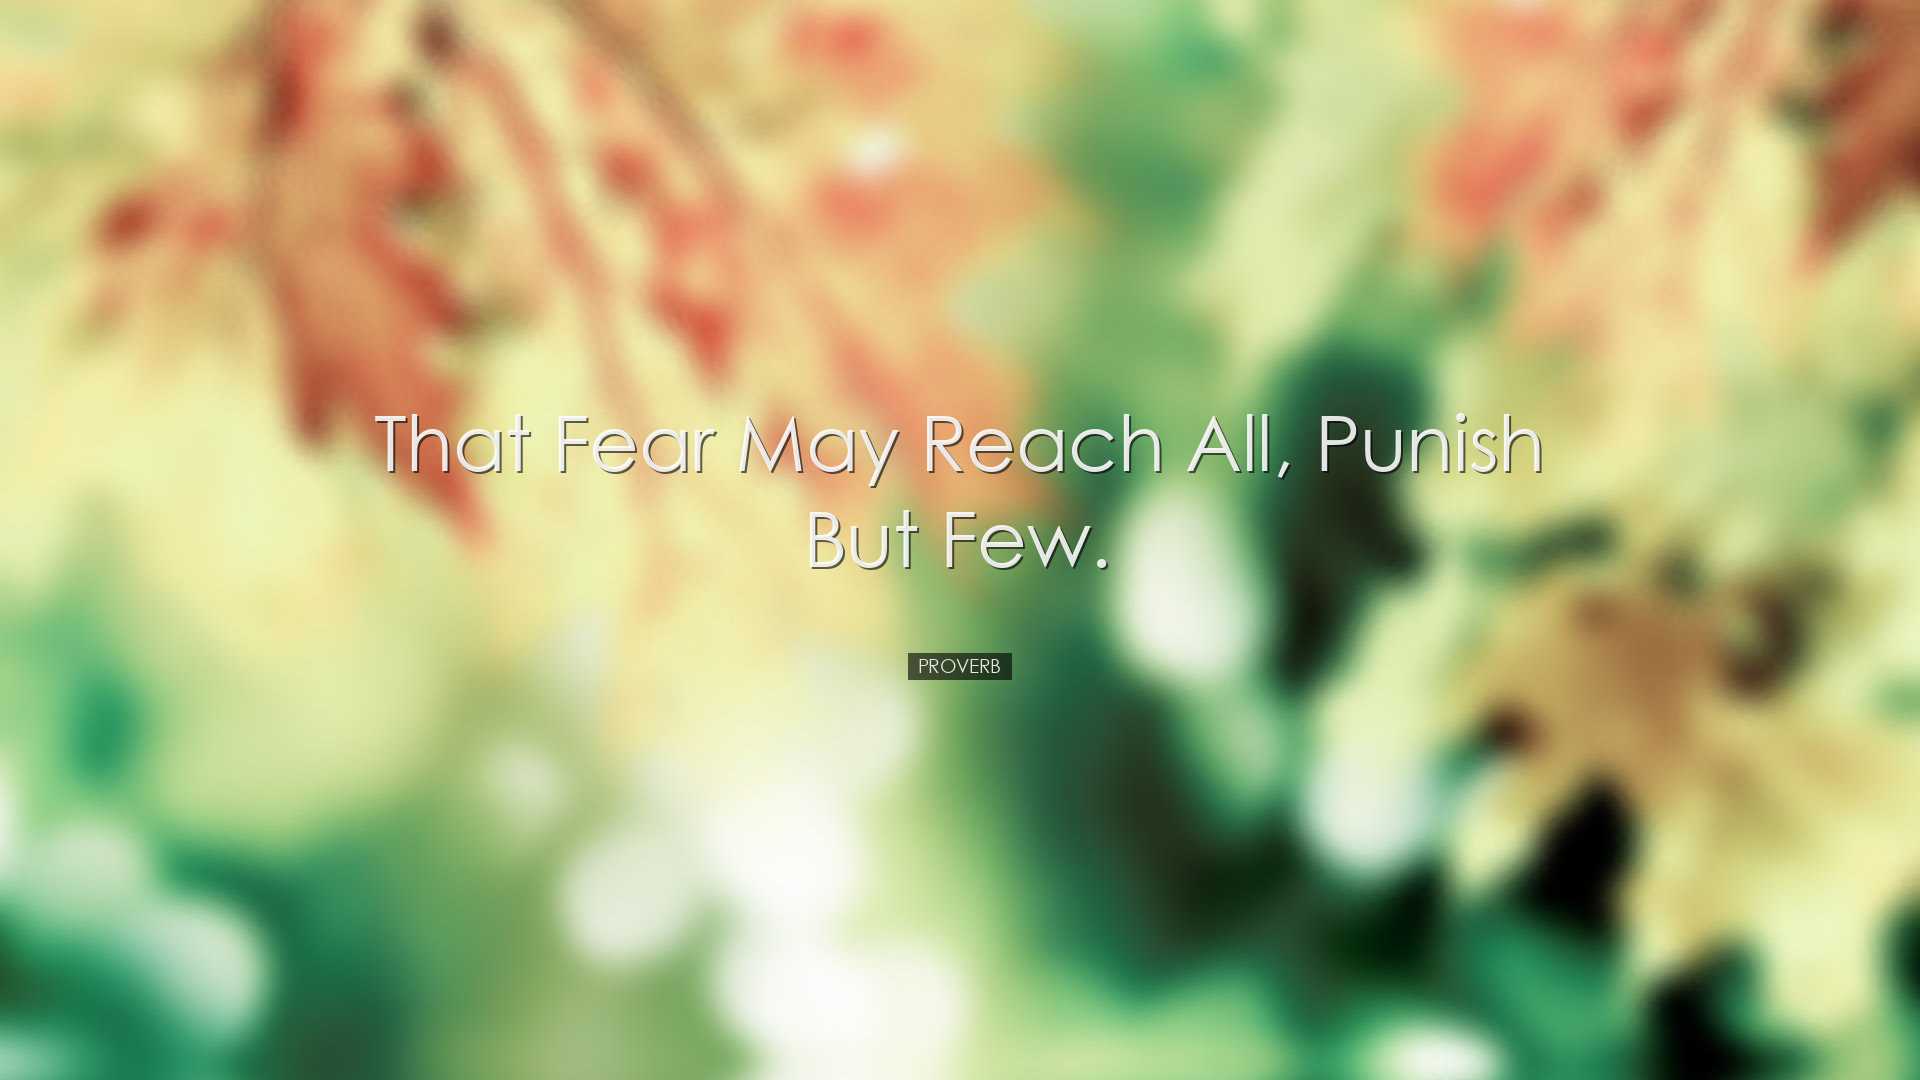 That fear may reach all, punish but few. - Proverb